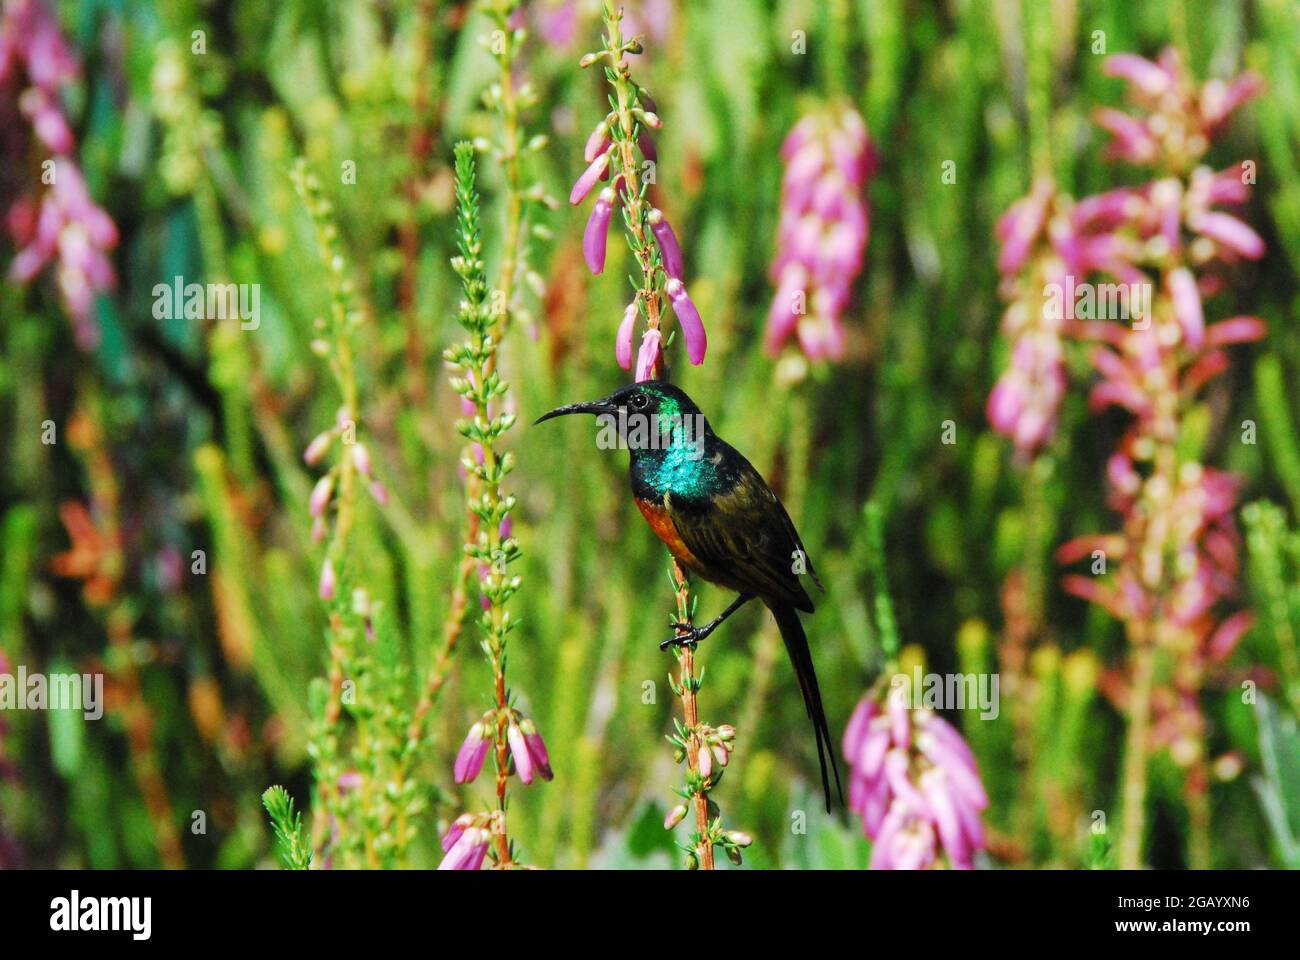 Close up of a wild, tiny colorful Marico Sunbird, perched on beautiful flowers.  Shot in the Kirstenbosch Gardens in South Africa. Stock Photo